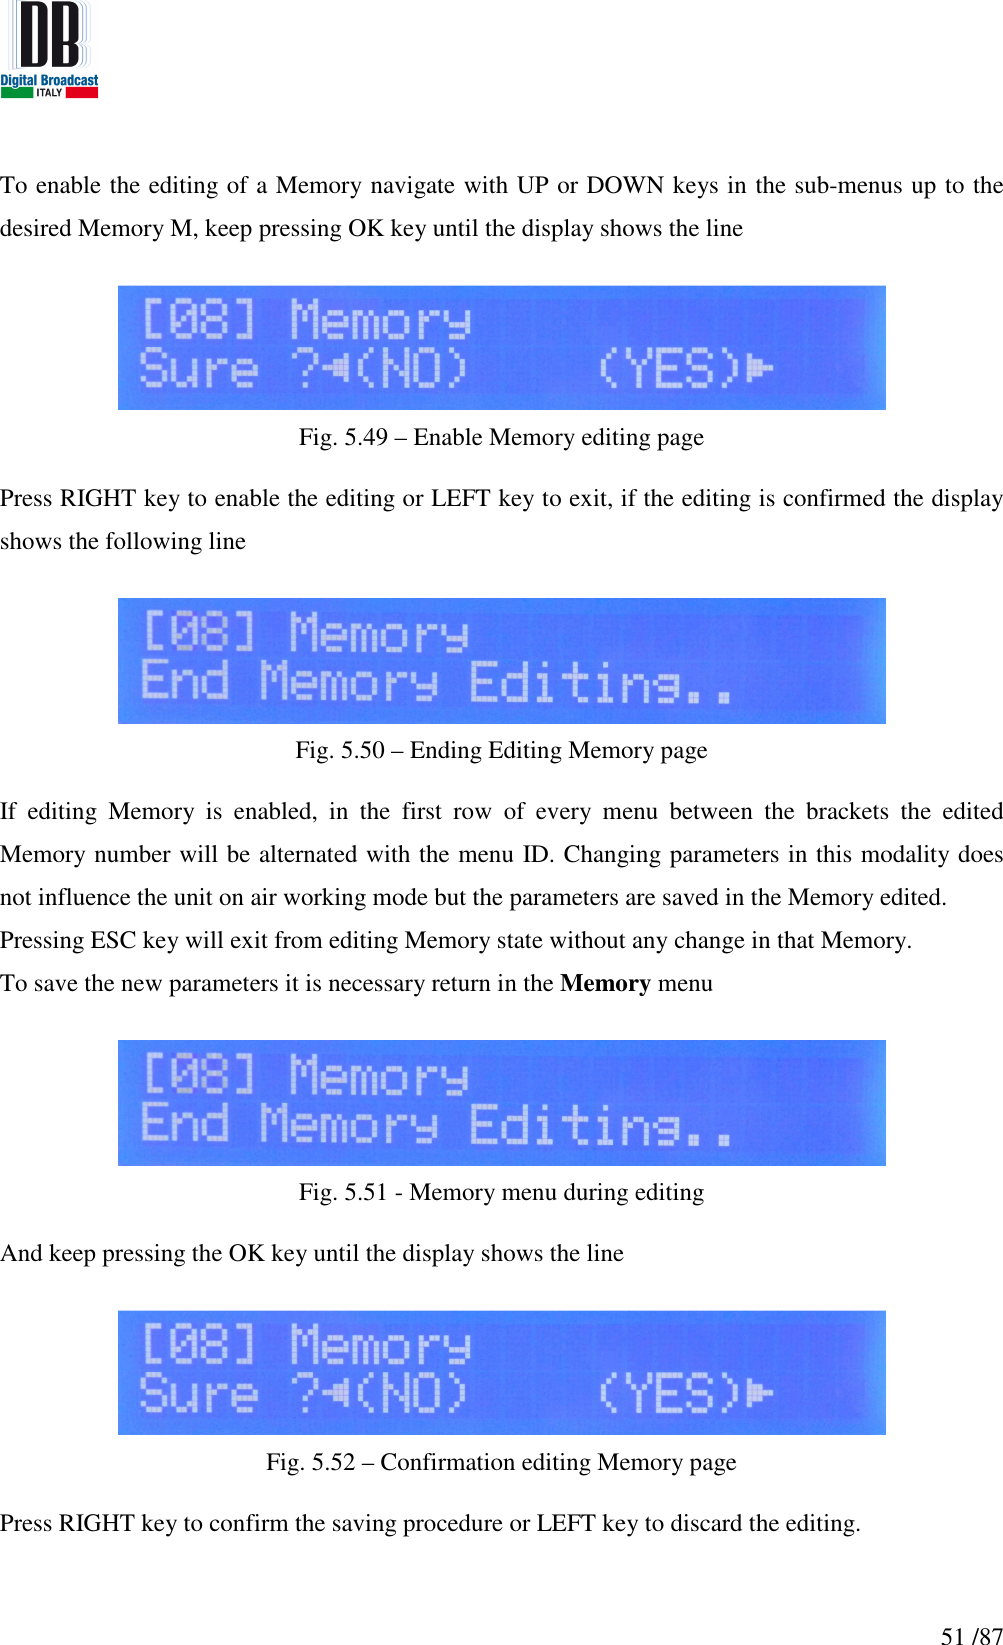   51 /87 To enable the editing of a Memory navigate with UP or DOWN keys in the sub-menus up to the  desired Memory M, keep pressing OK key until the display shows the line   Fig. 5.49 – Enable Memory editing page  Press RIGHT key to enable the editing or LEFT key to exit, if the editing is confirmed the display shows the following line   Fig. 5.50 – Ending Editing Memory page  If  editing  Memory  is  enabled,  in  the  first  row  of  every  menu  between  the  brackets  the  edited Memory number will be alternated with the menu ID. Changing parameters in this modality does not influence the unit on air working mode but the parameters are saved in the Memory edited. Pressing ESC key will exit from editing Memory state without any change in that Memory. To save the new parameters it is necessary return in the Memory menu    Fig. 5.51 - Memory menu during editing  And keep pressing the OK key until the display shows the line   Fig. 5.52 – Confirmation editing Memory page  Press RIGHT key to confirm the saving procedure or LEFT key to discard the editing.    